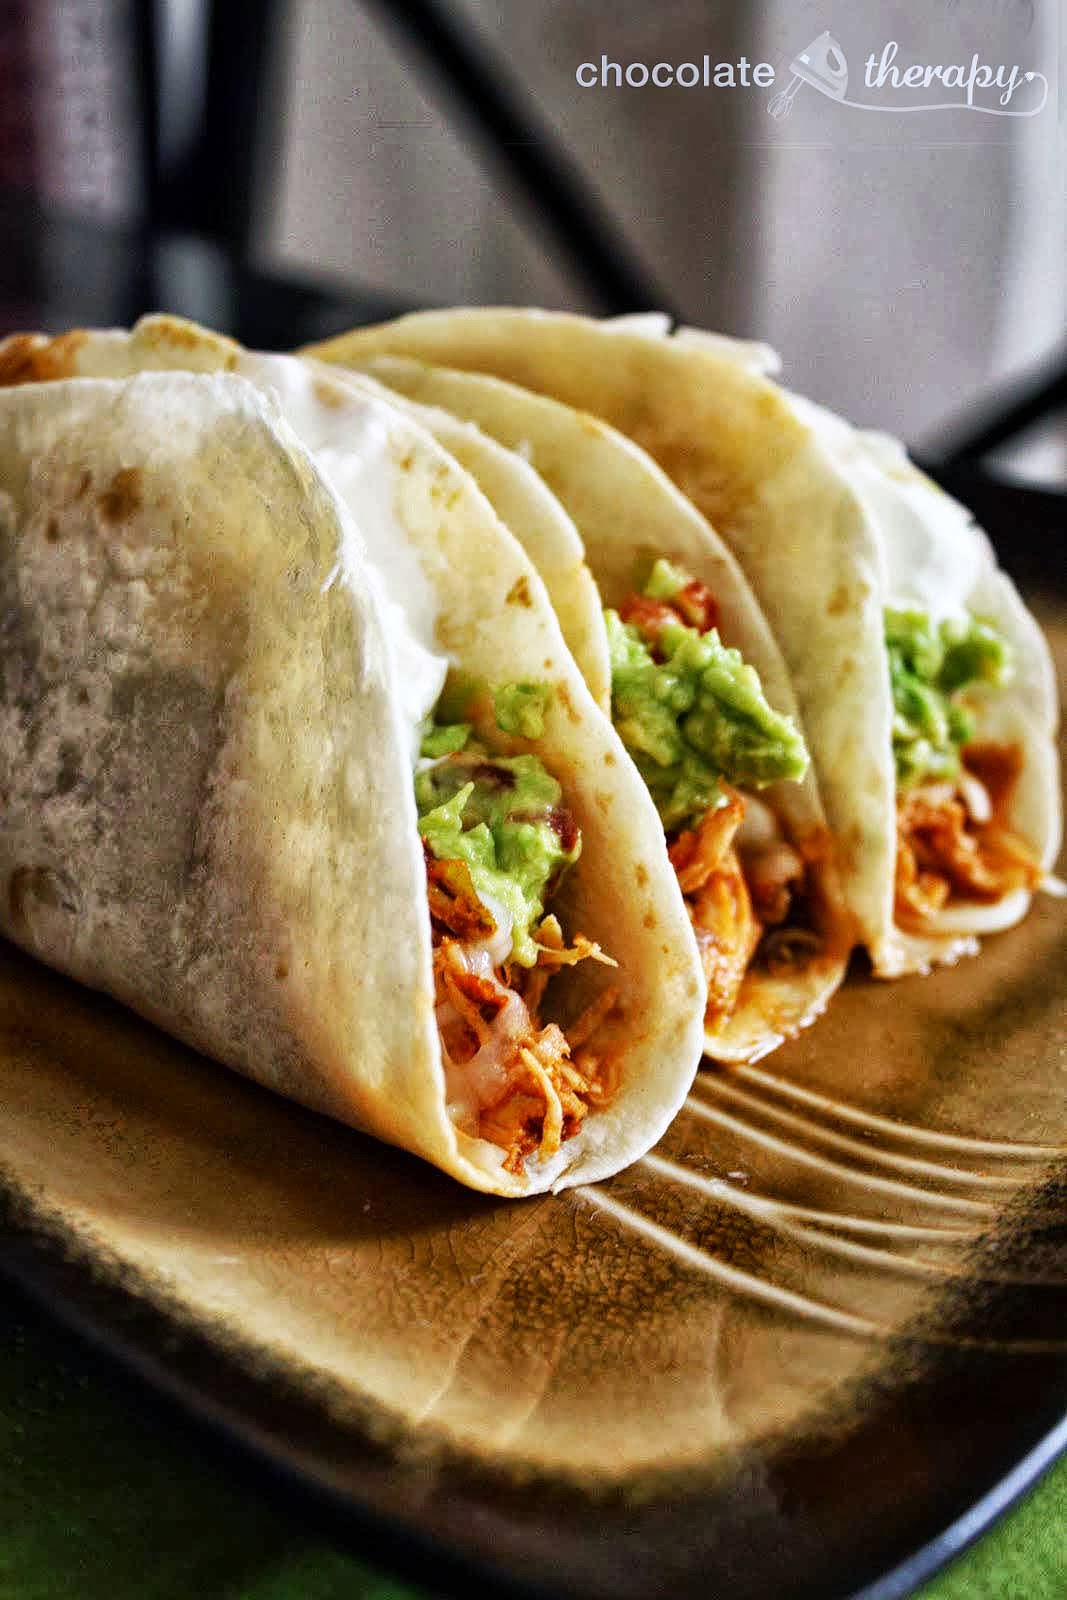 Crockpot Chicken Tacos - These simple pulled chicken tacos are made with a jar of salsa and taco seasoning. Put in the crock pot in the morning and enjoy the day of sun and play while it cooks.